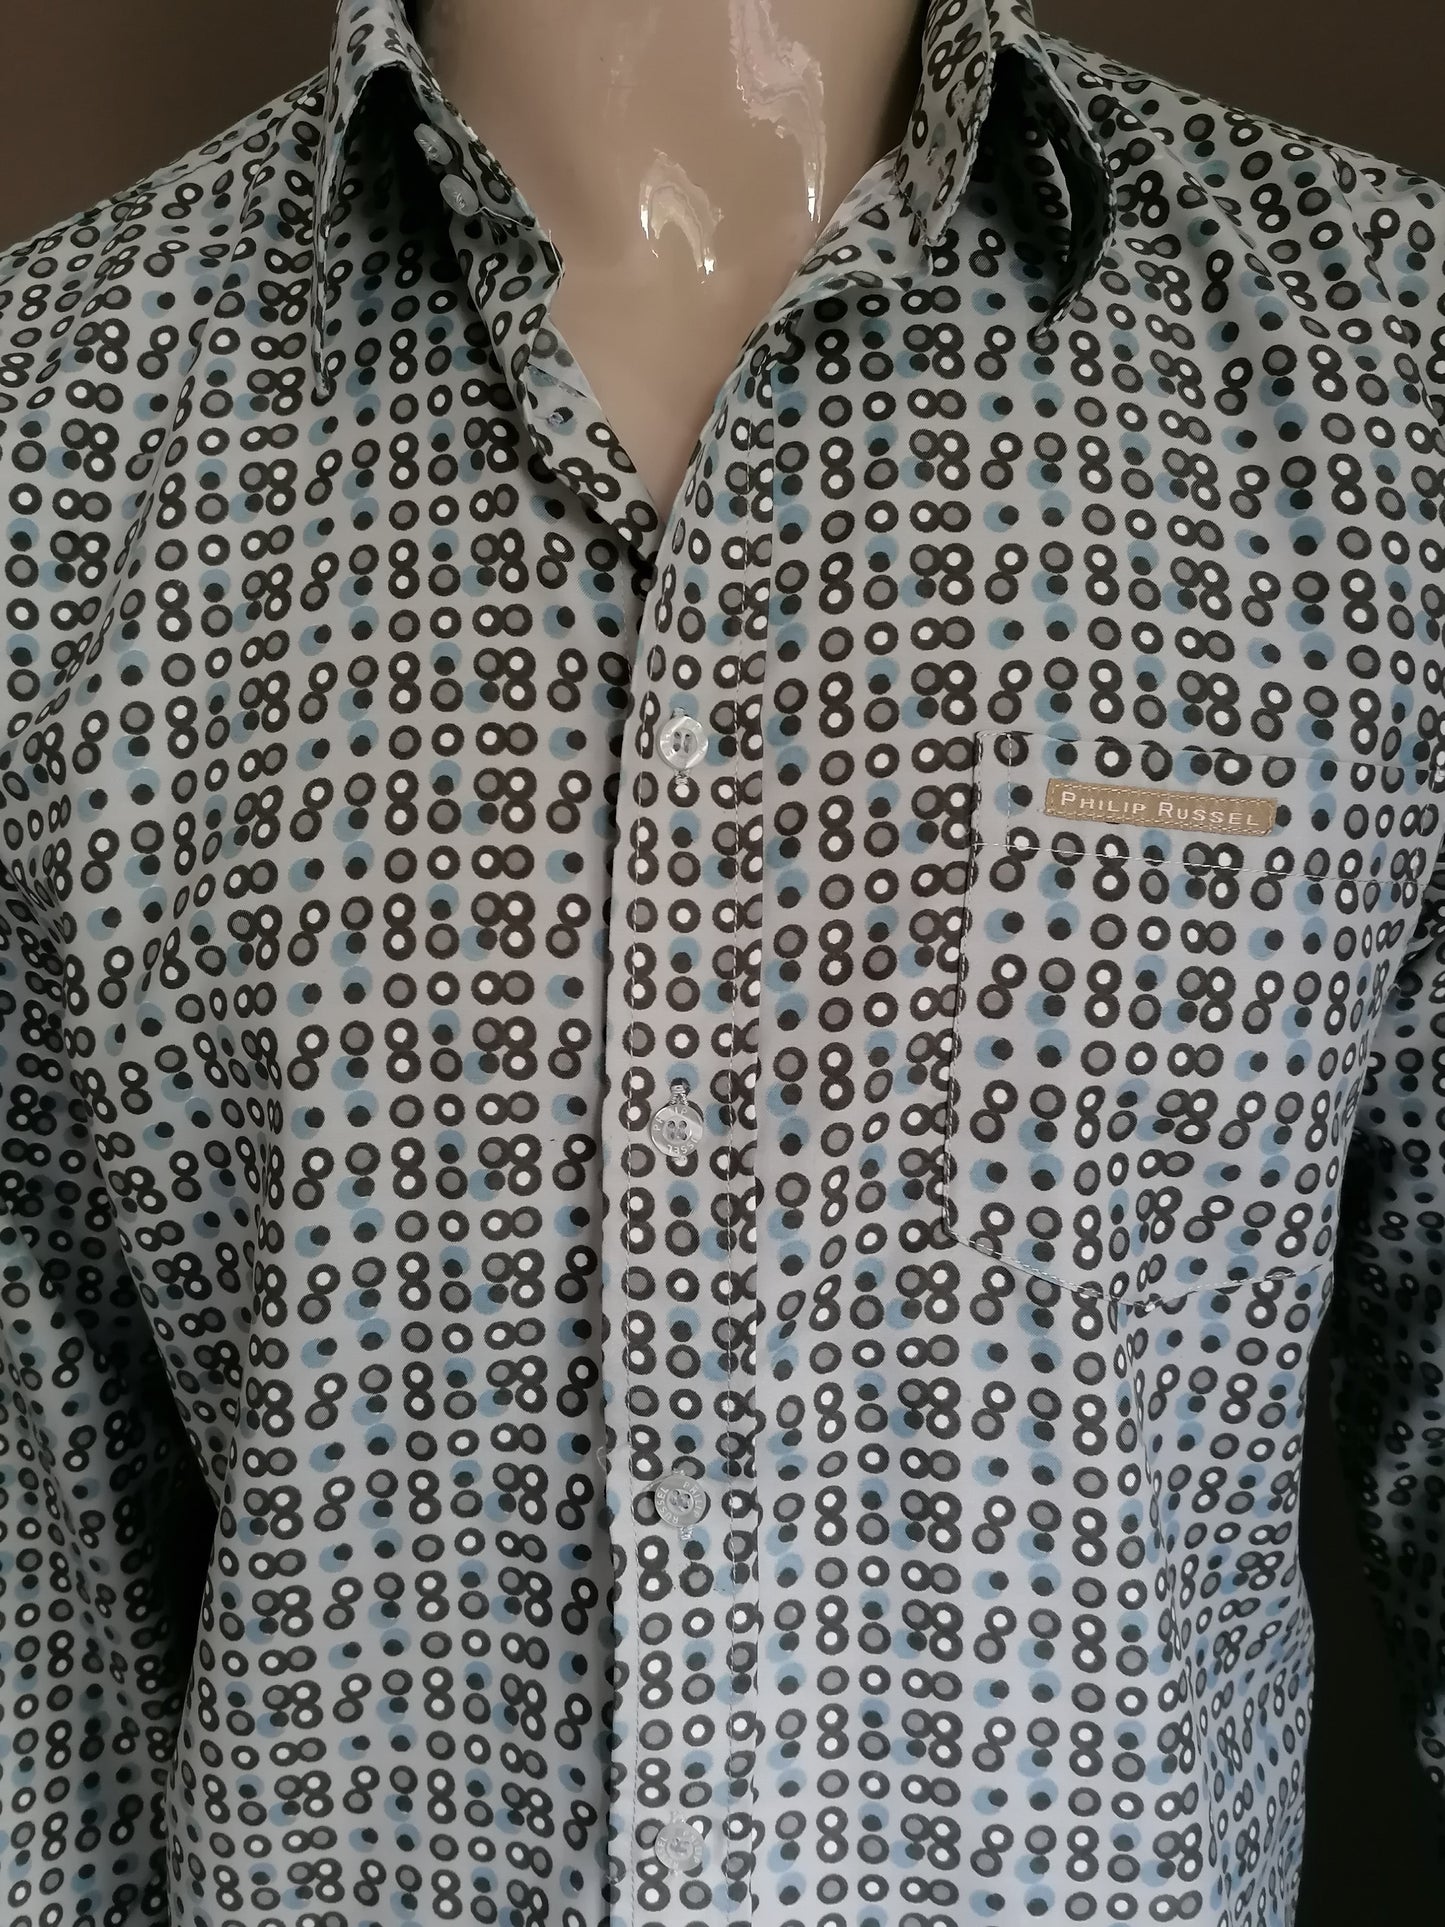 Philip Russel shirt. Gray blue print. Size L. 100% Polyester